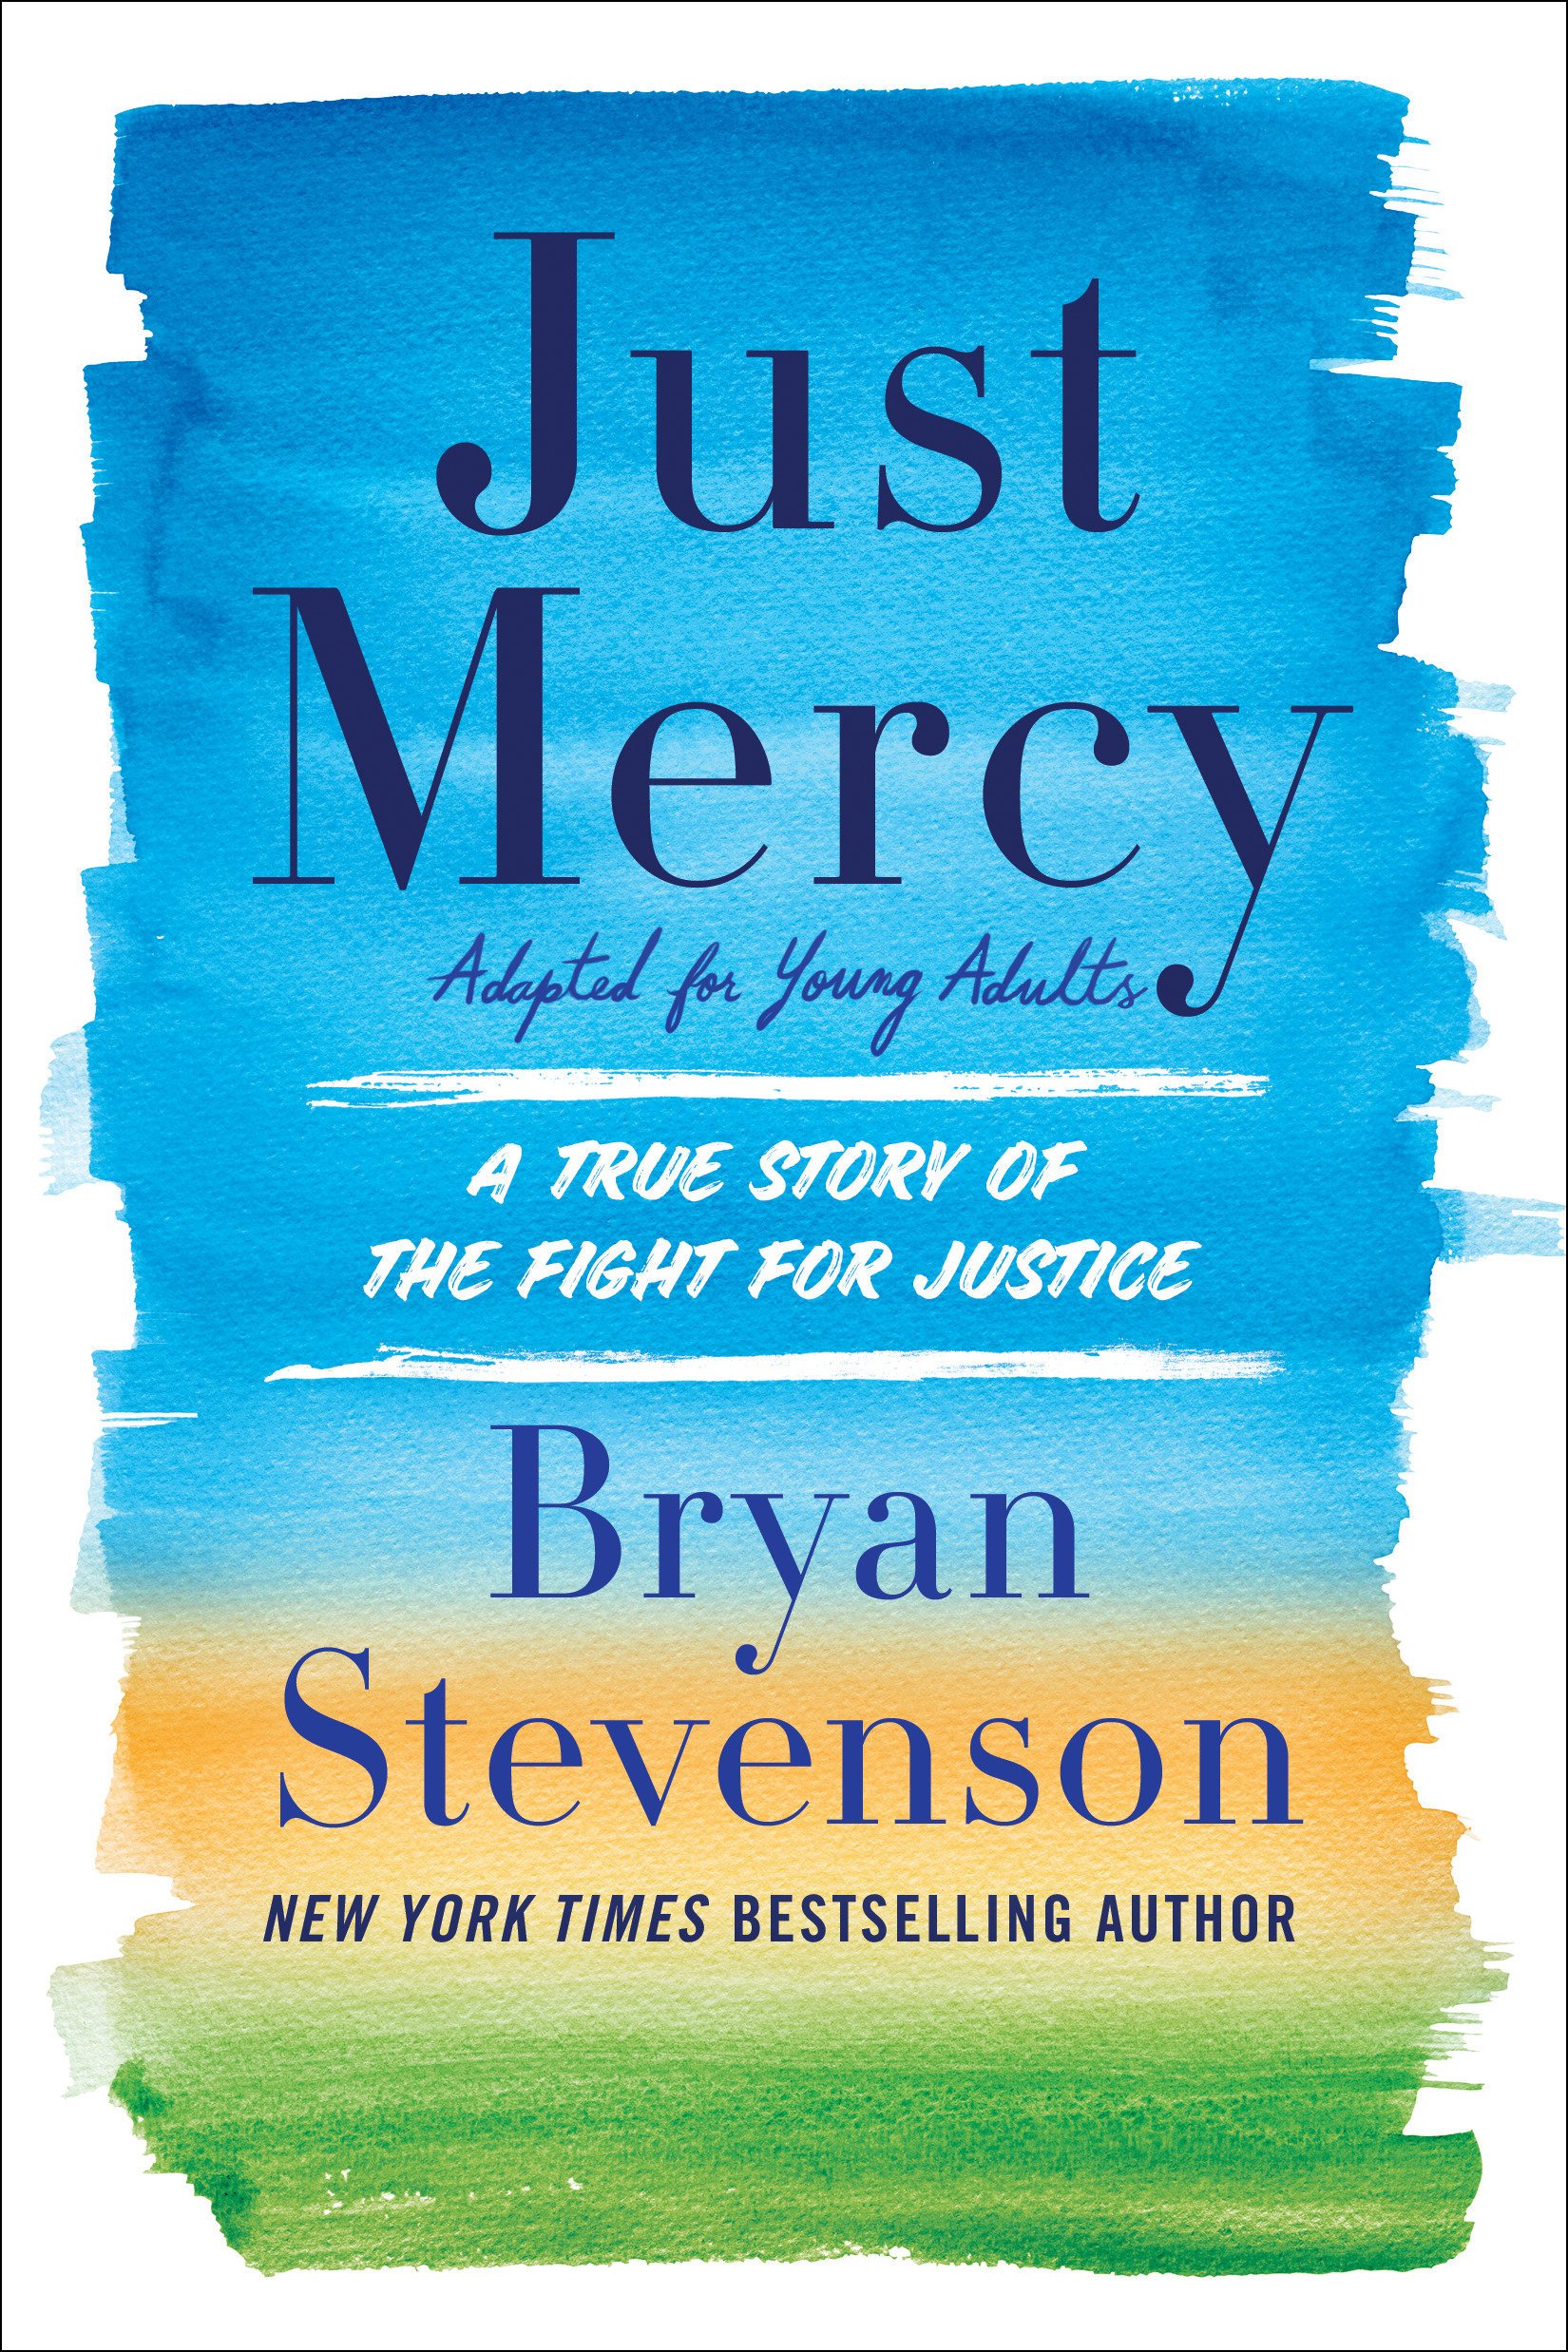 Image for "Just Mercy (Adapted for Young Adults)"